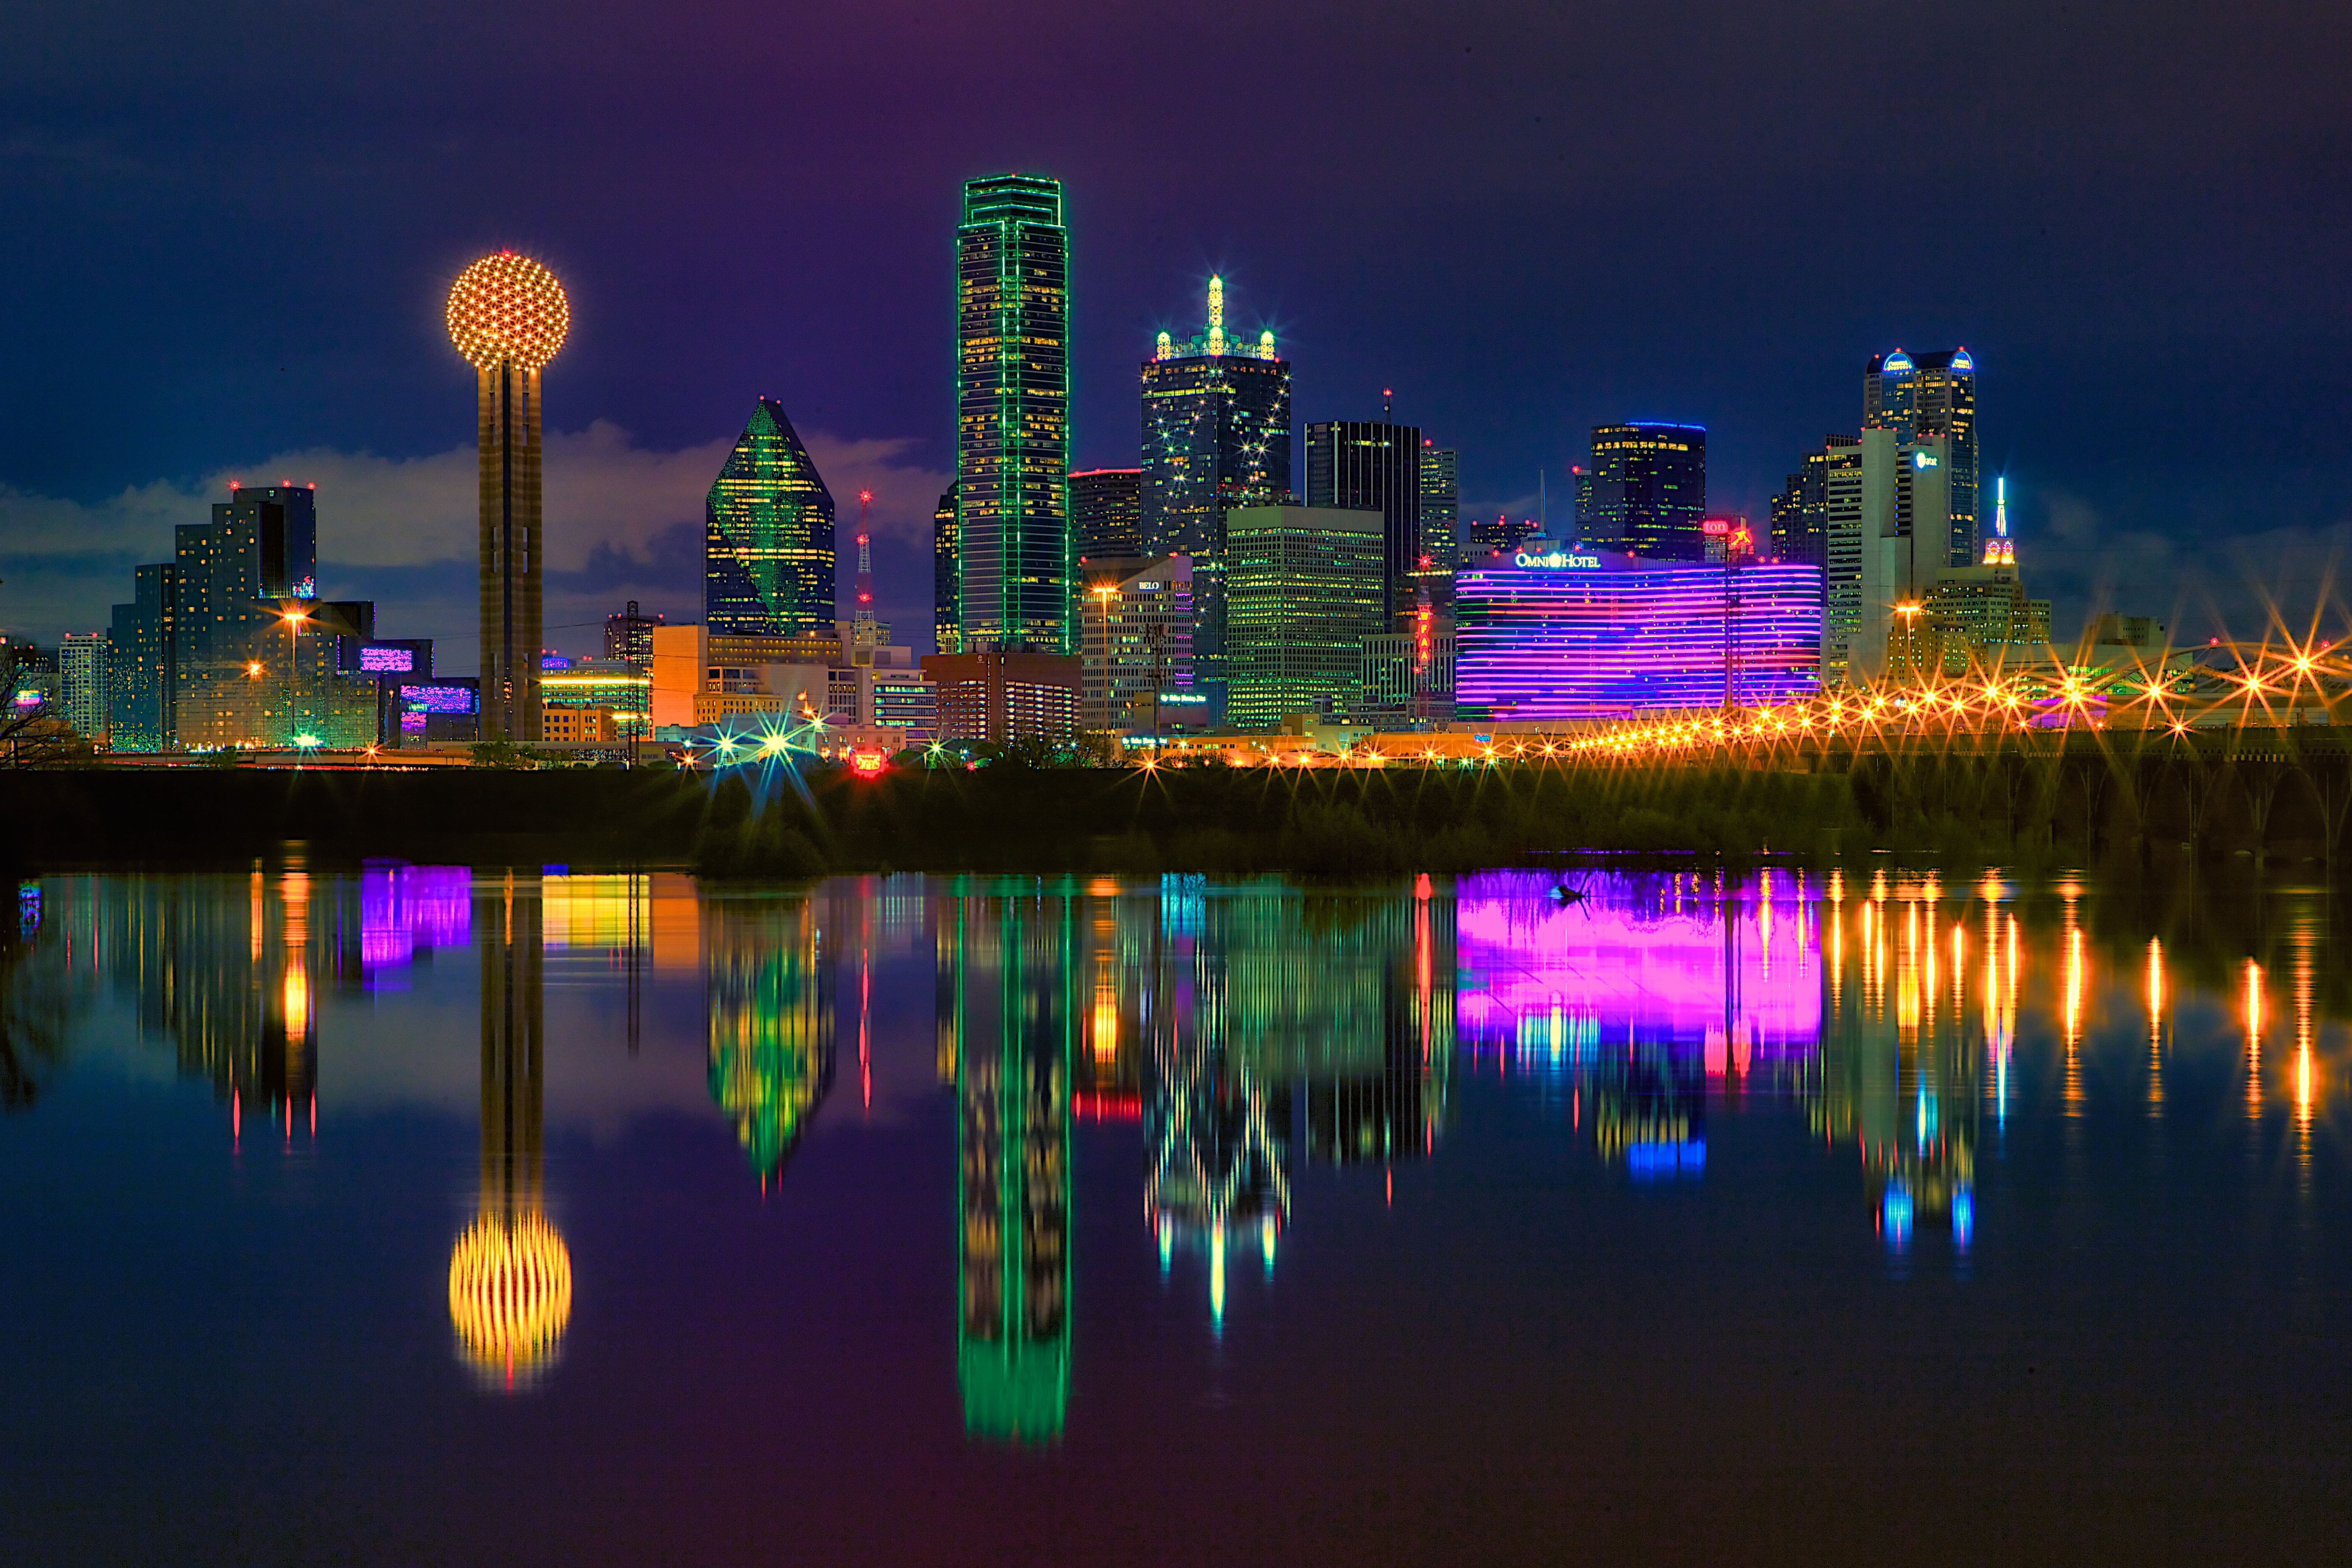 Welcome to Dallas – Together let’s make it more livable